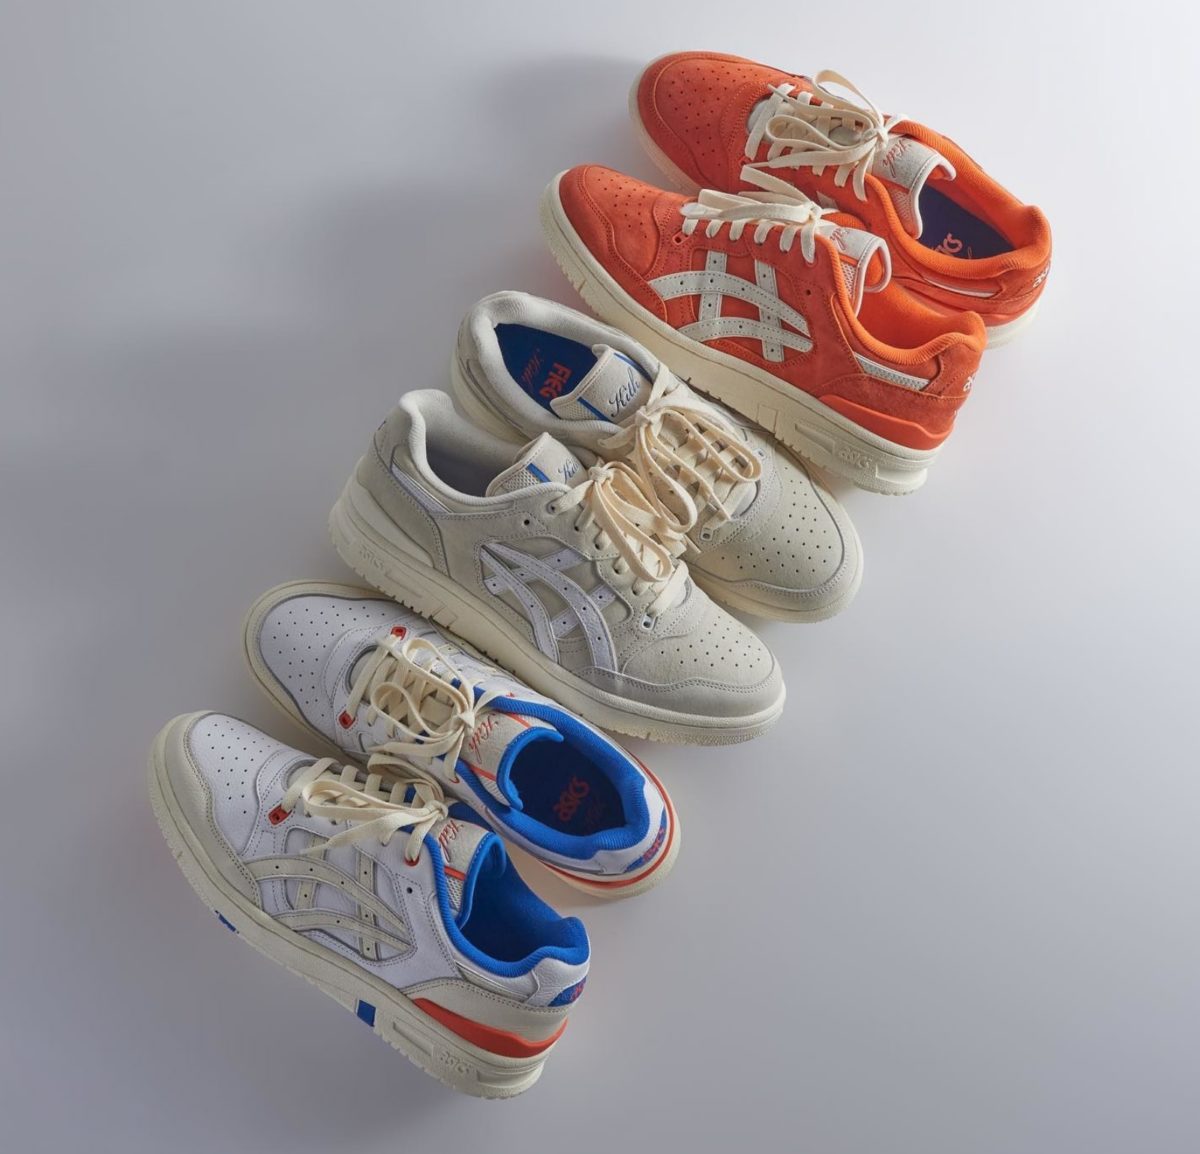 Ronnie Fieg's Knicks-Inspired Asics EX89 Is Dropping This Week